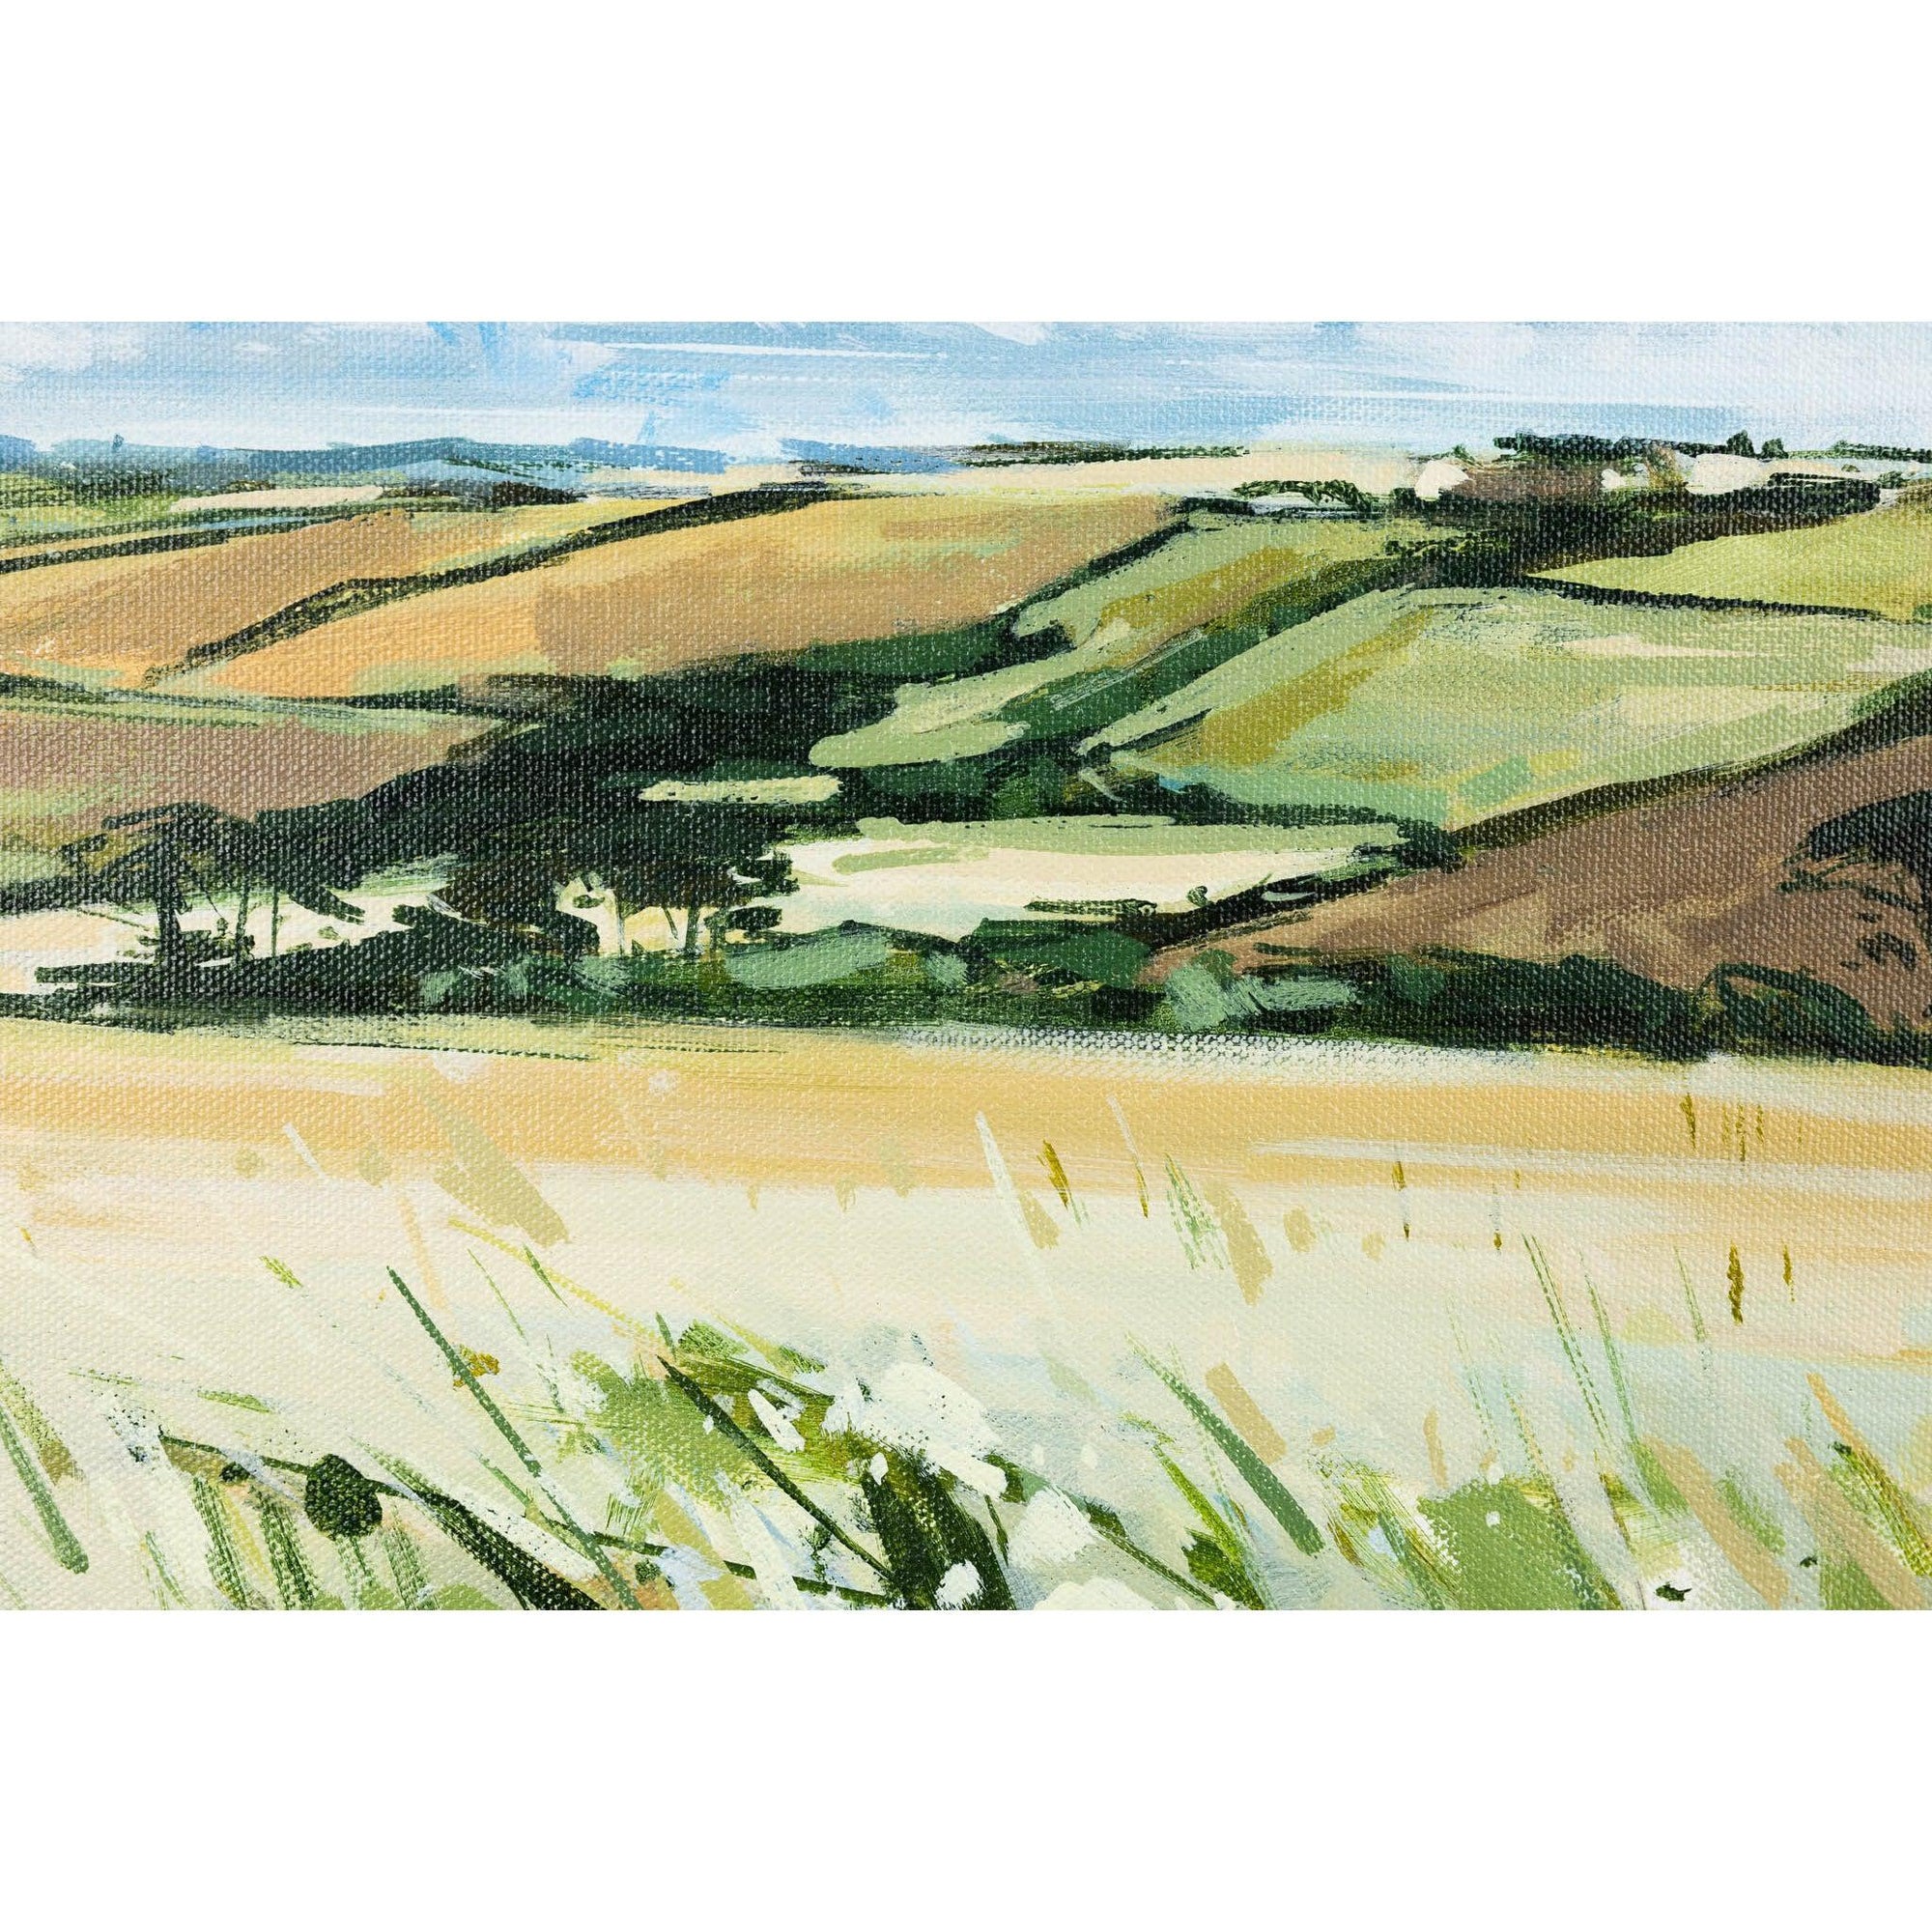 ’Summer Fields By The Estuary’ acrylic and oil on canvas by Imogen Bone. Available at Padstow Gallery, Cornwall